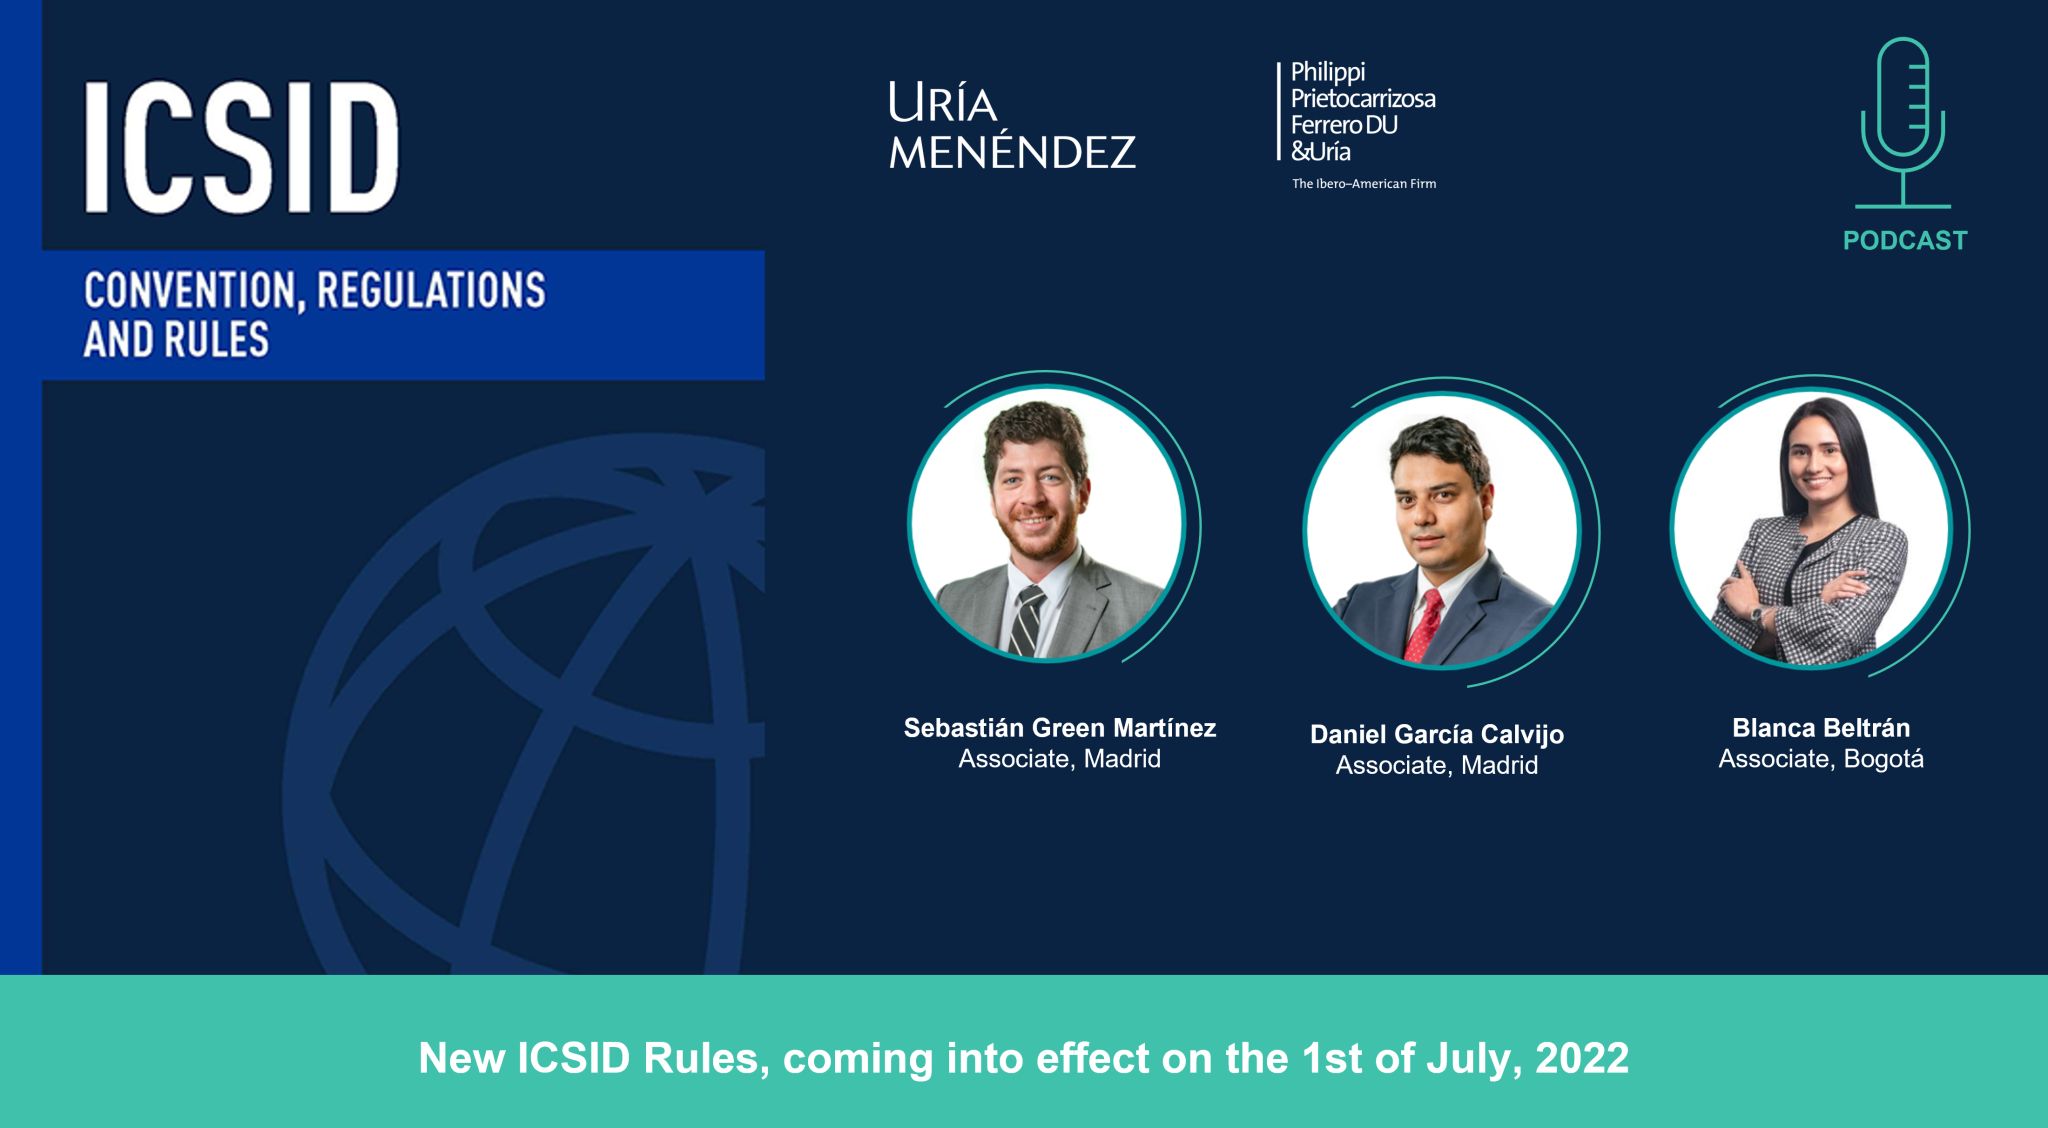 New ICSID Rules, coming into effect on the 1st of July, 2022